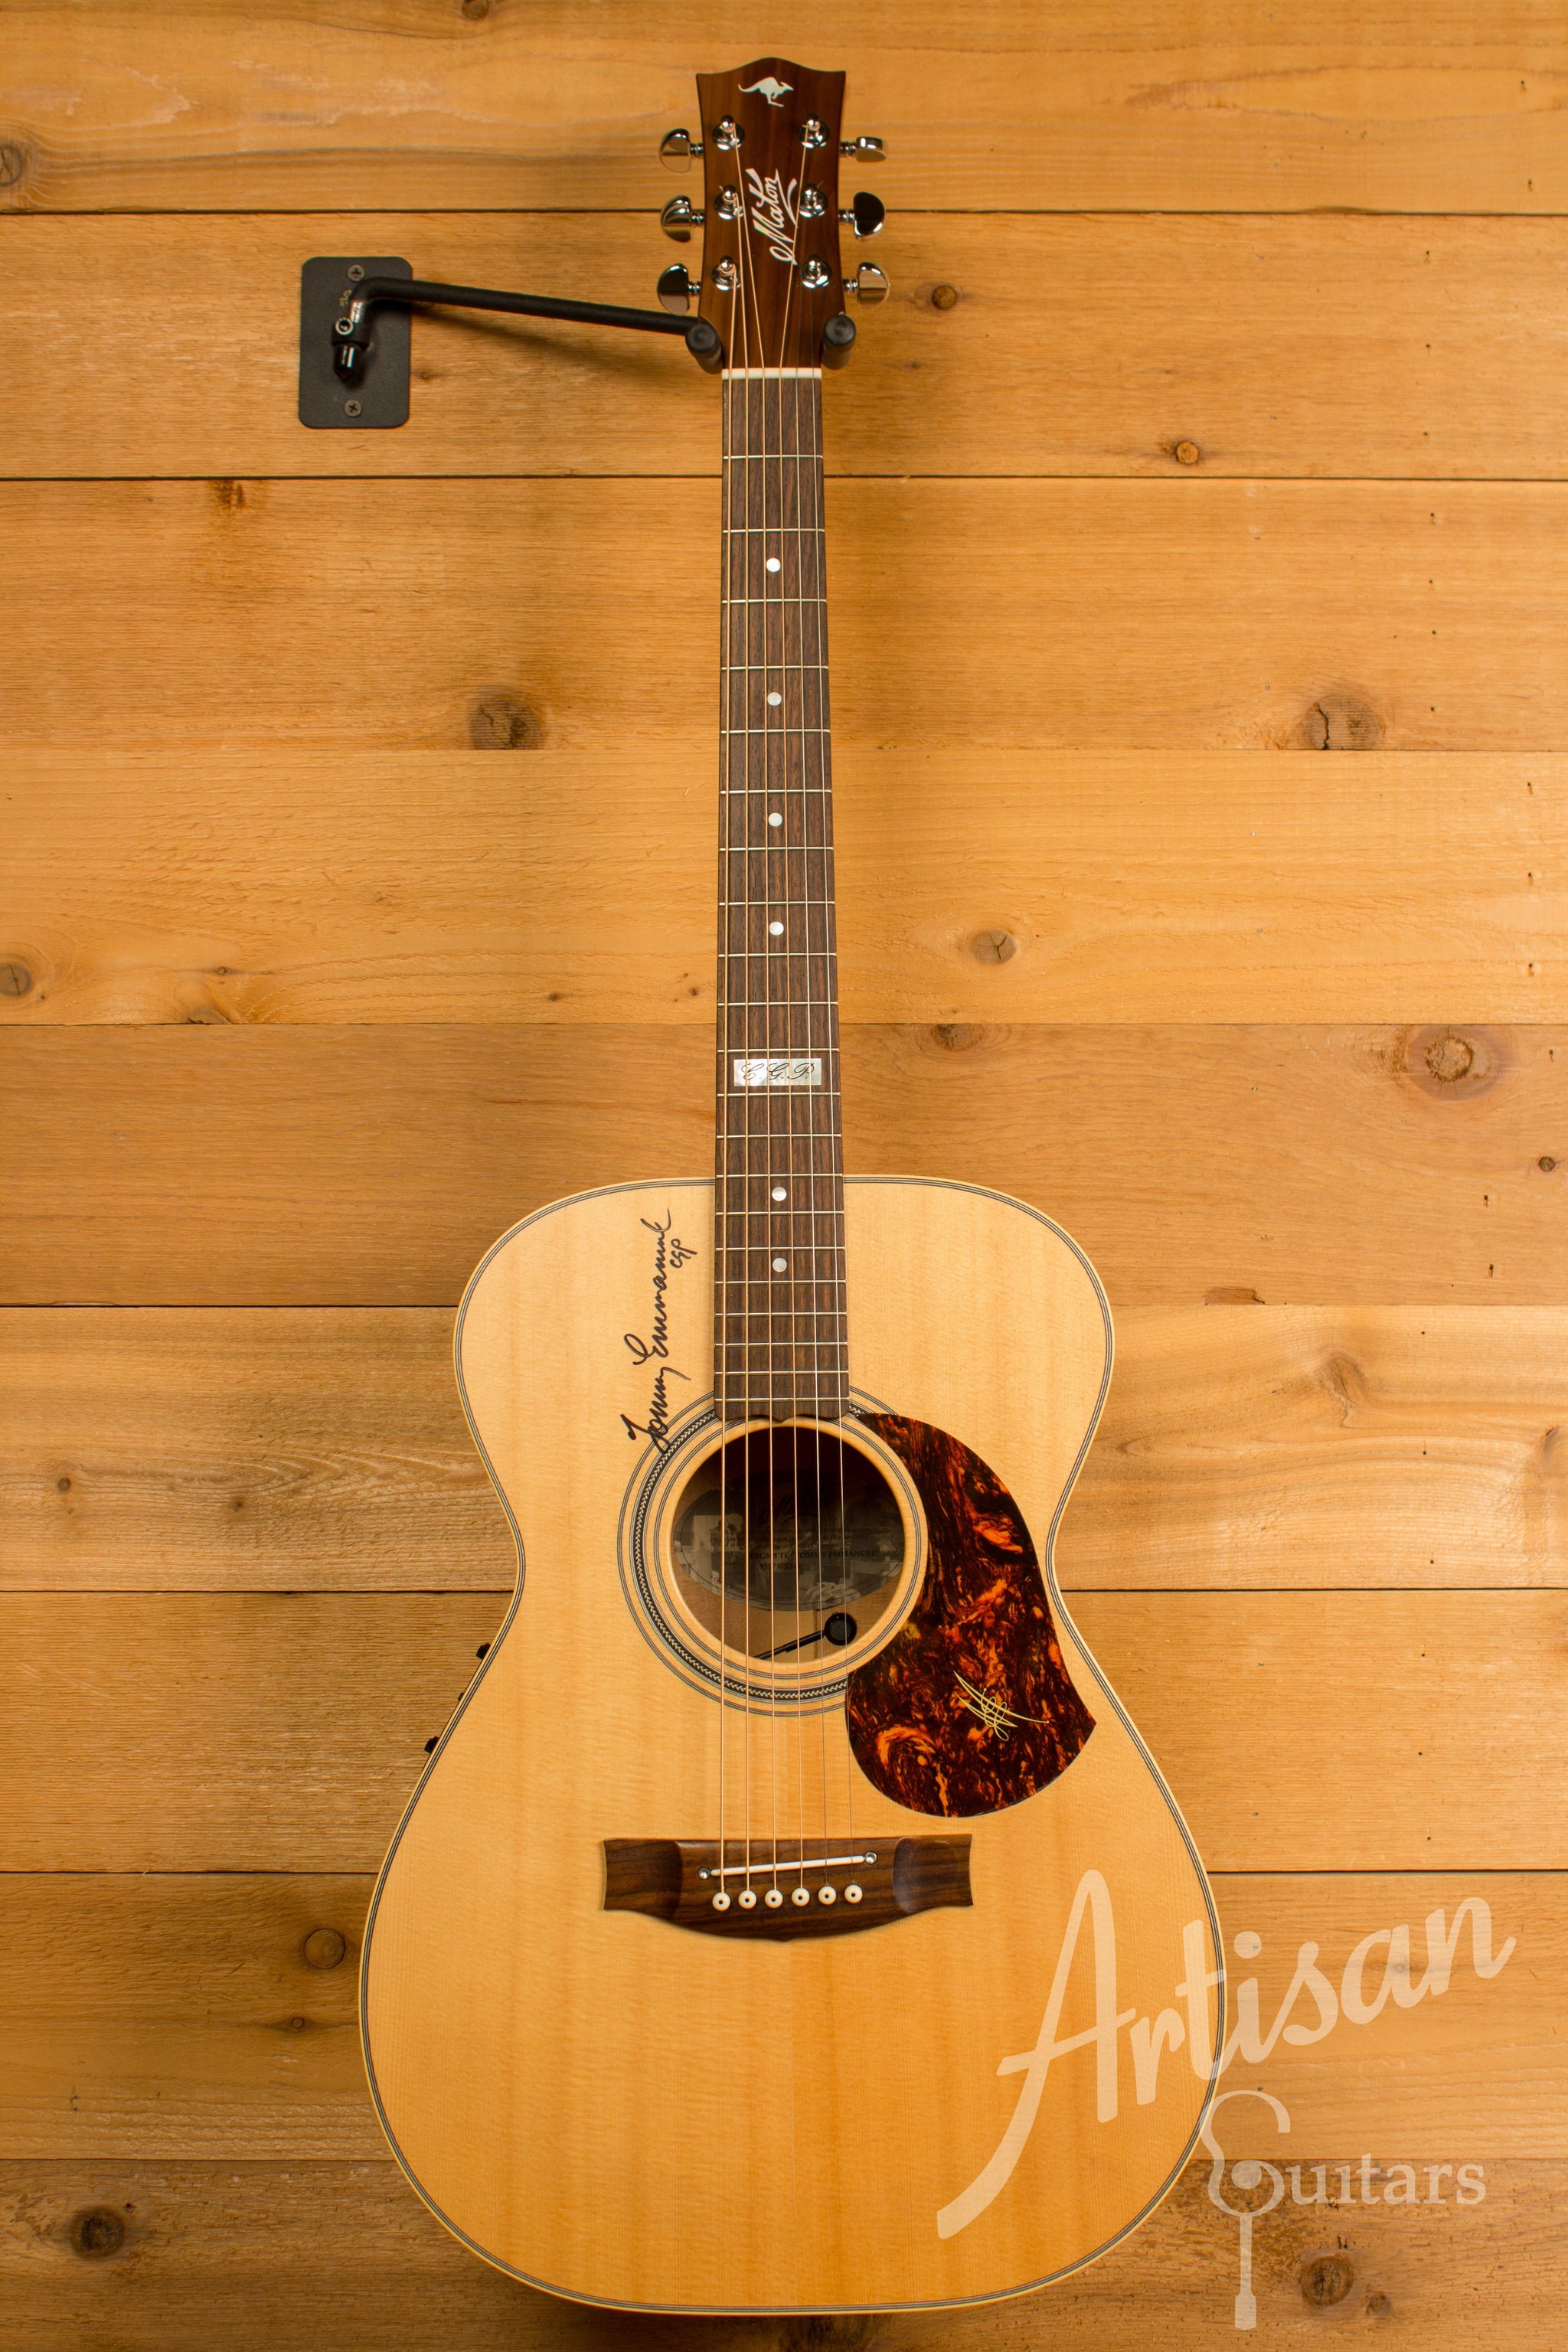 Maton EBG808TE Signature Sitka and Queensland Maple Signed by Tommy Emmanuel Pre-Owned 2014 ID-11306 - Artisan Guitars